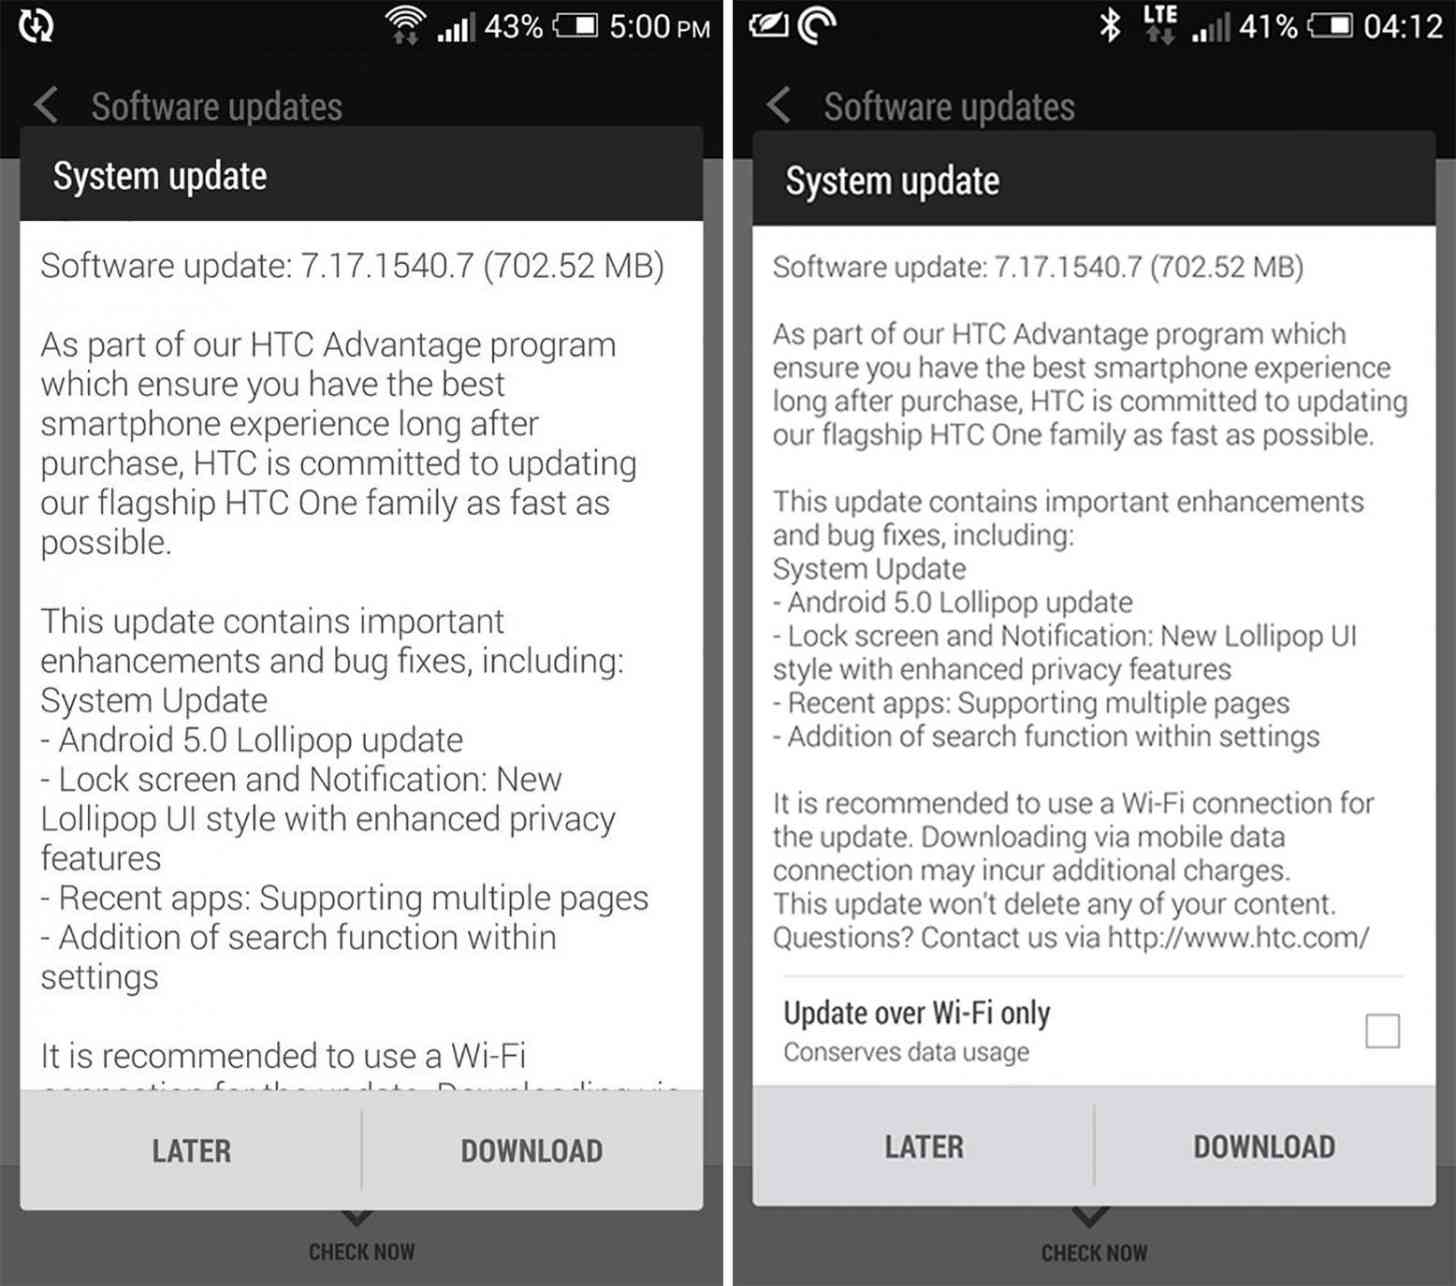 HTC One M7 Android 5.0 update